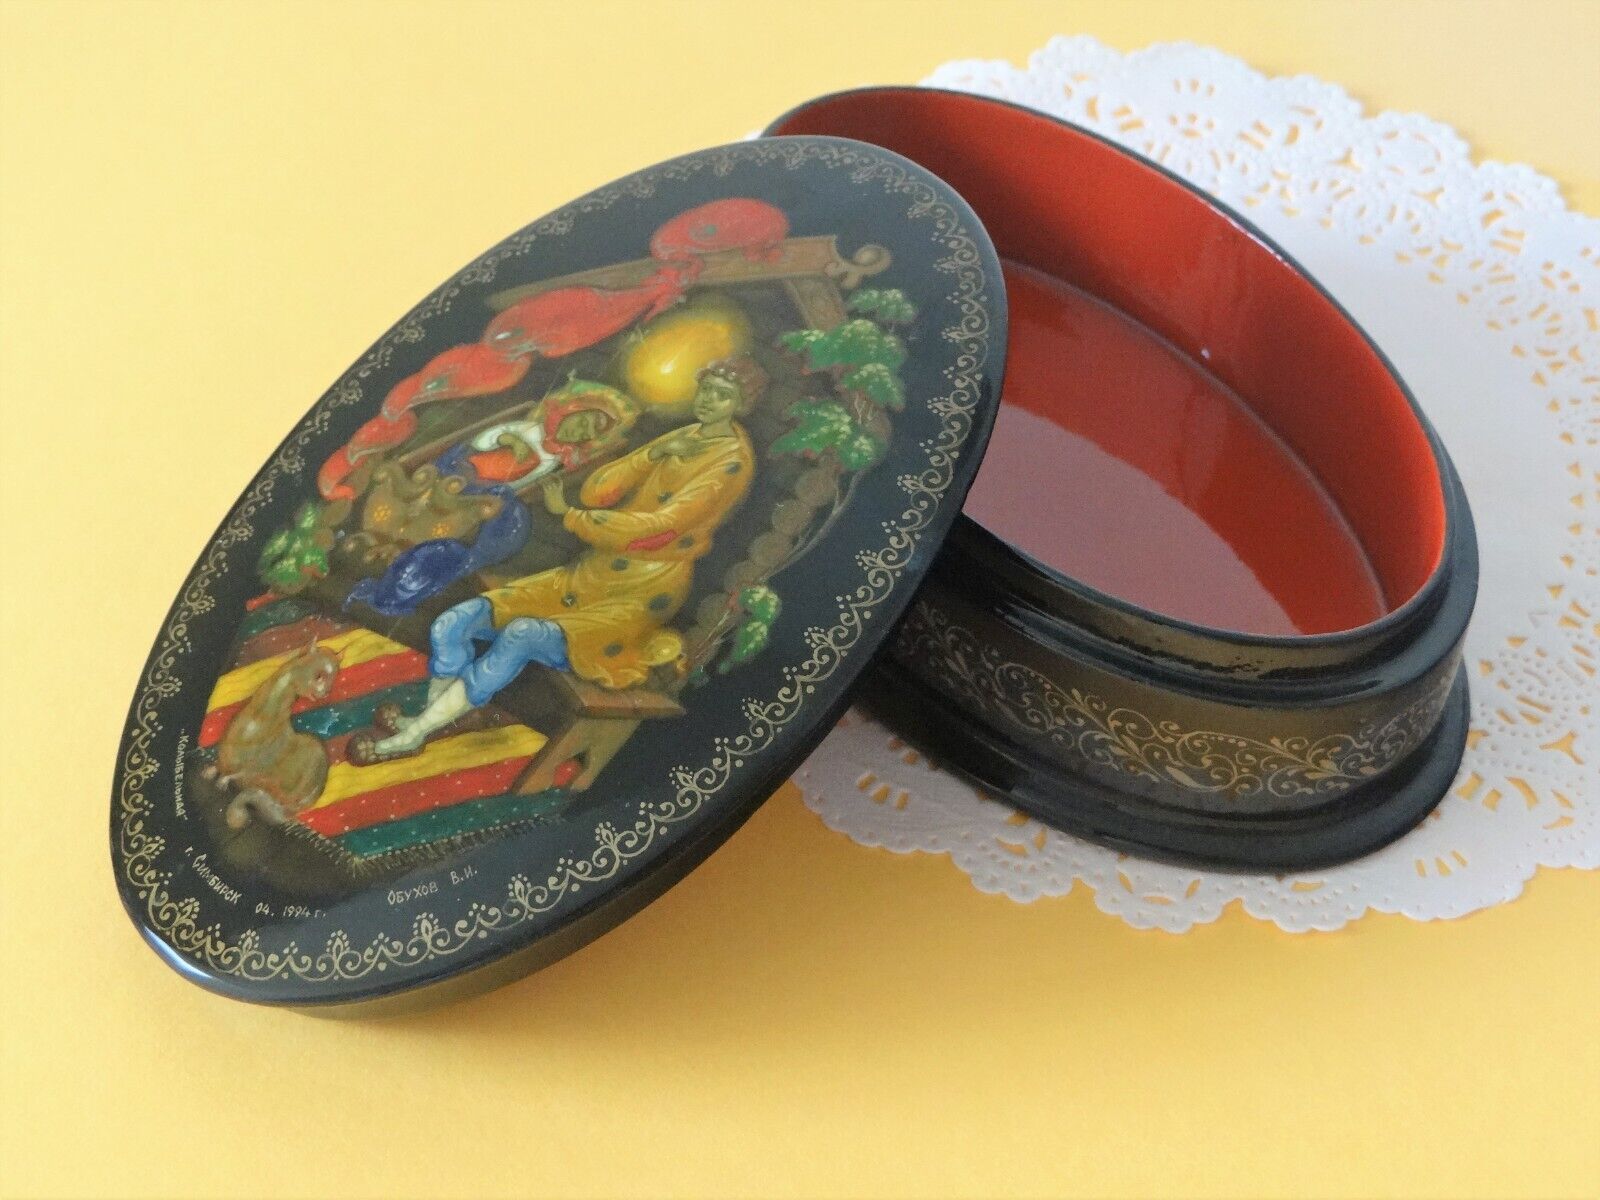 Vintage Russian Lacquer Box Hand-painted, signed.